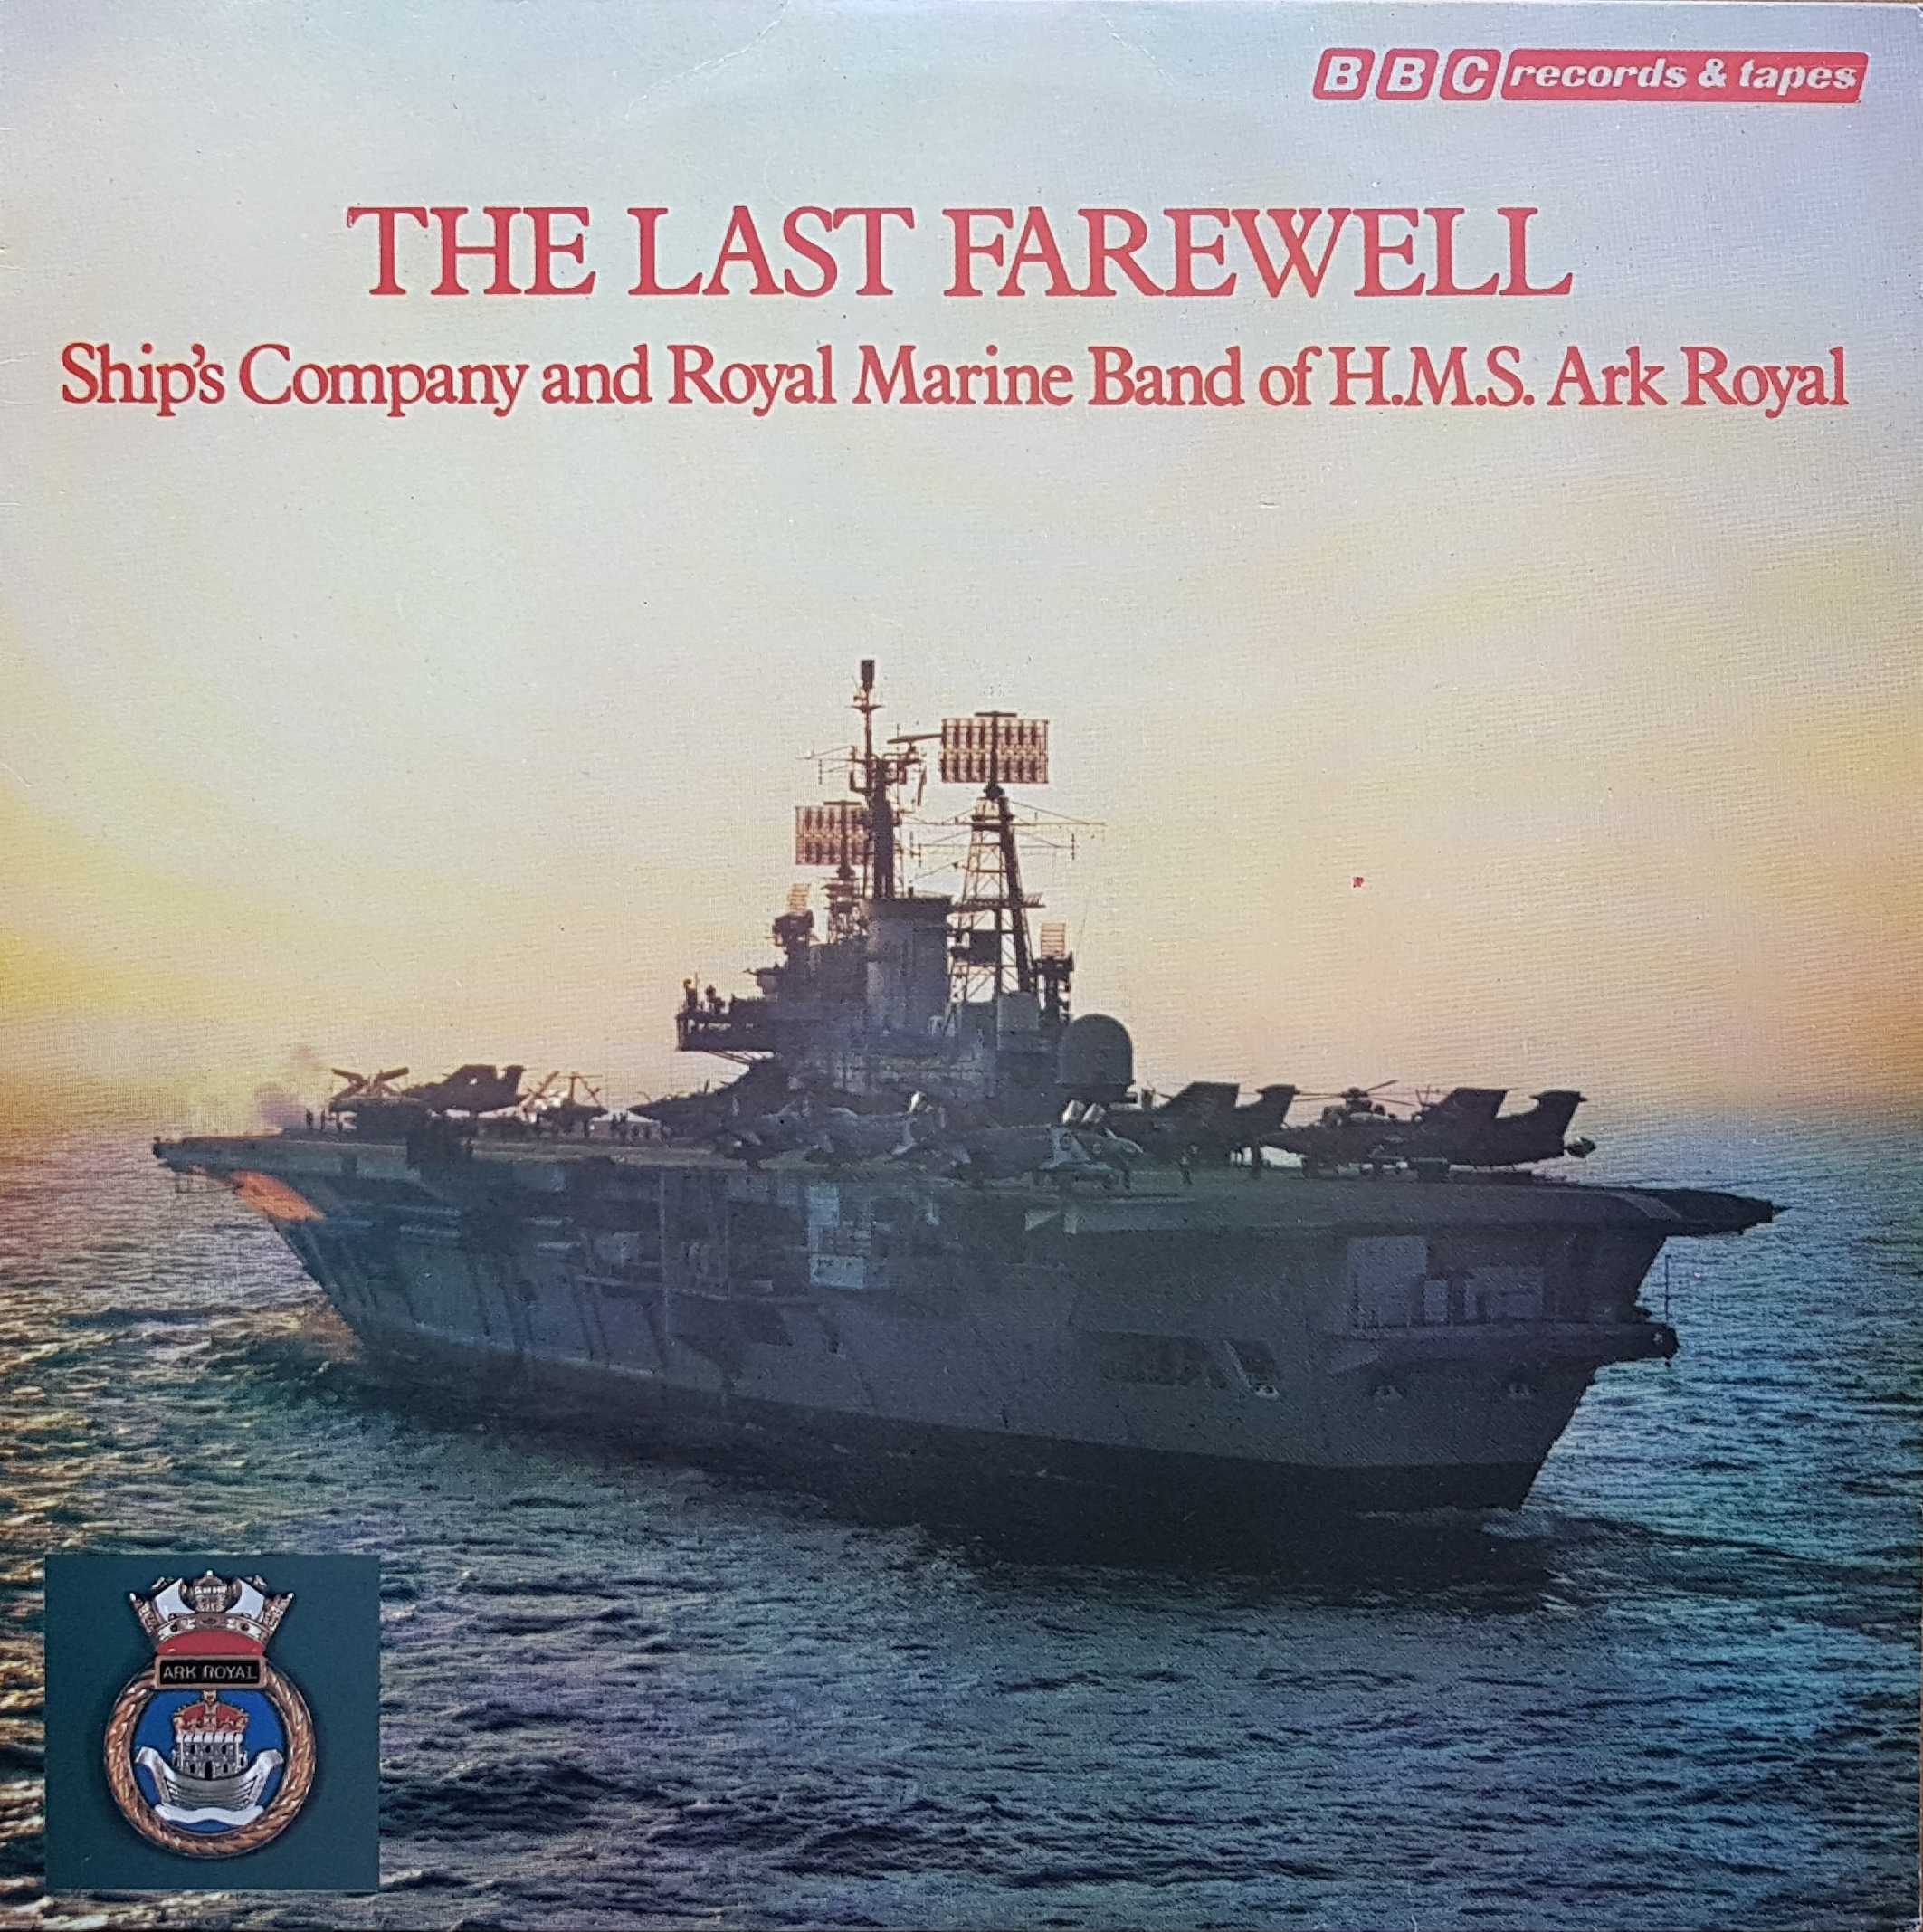 Picture of REH 357 The last farewell by artist Various / Ship's Company and Royal Marine Band of H. M. S. Ark Royal from the BBC albums - Records and Tapes library